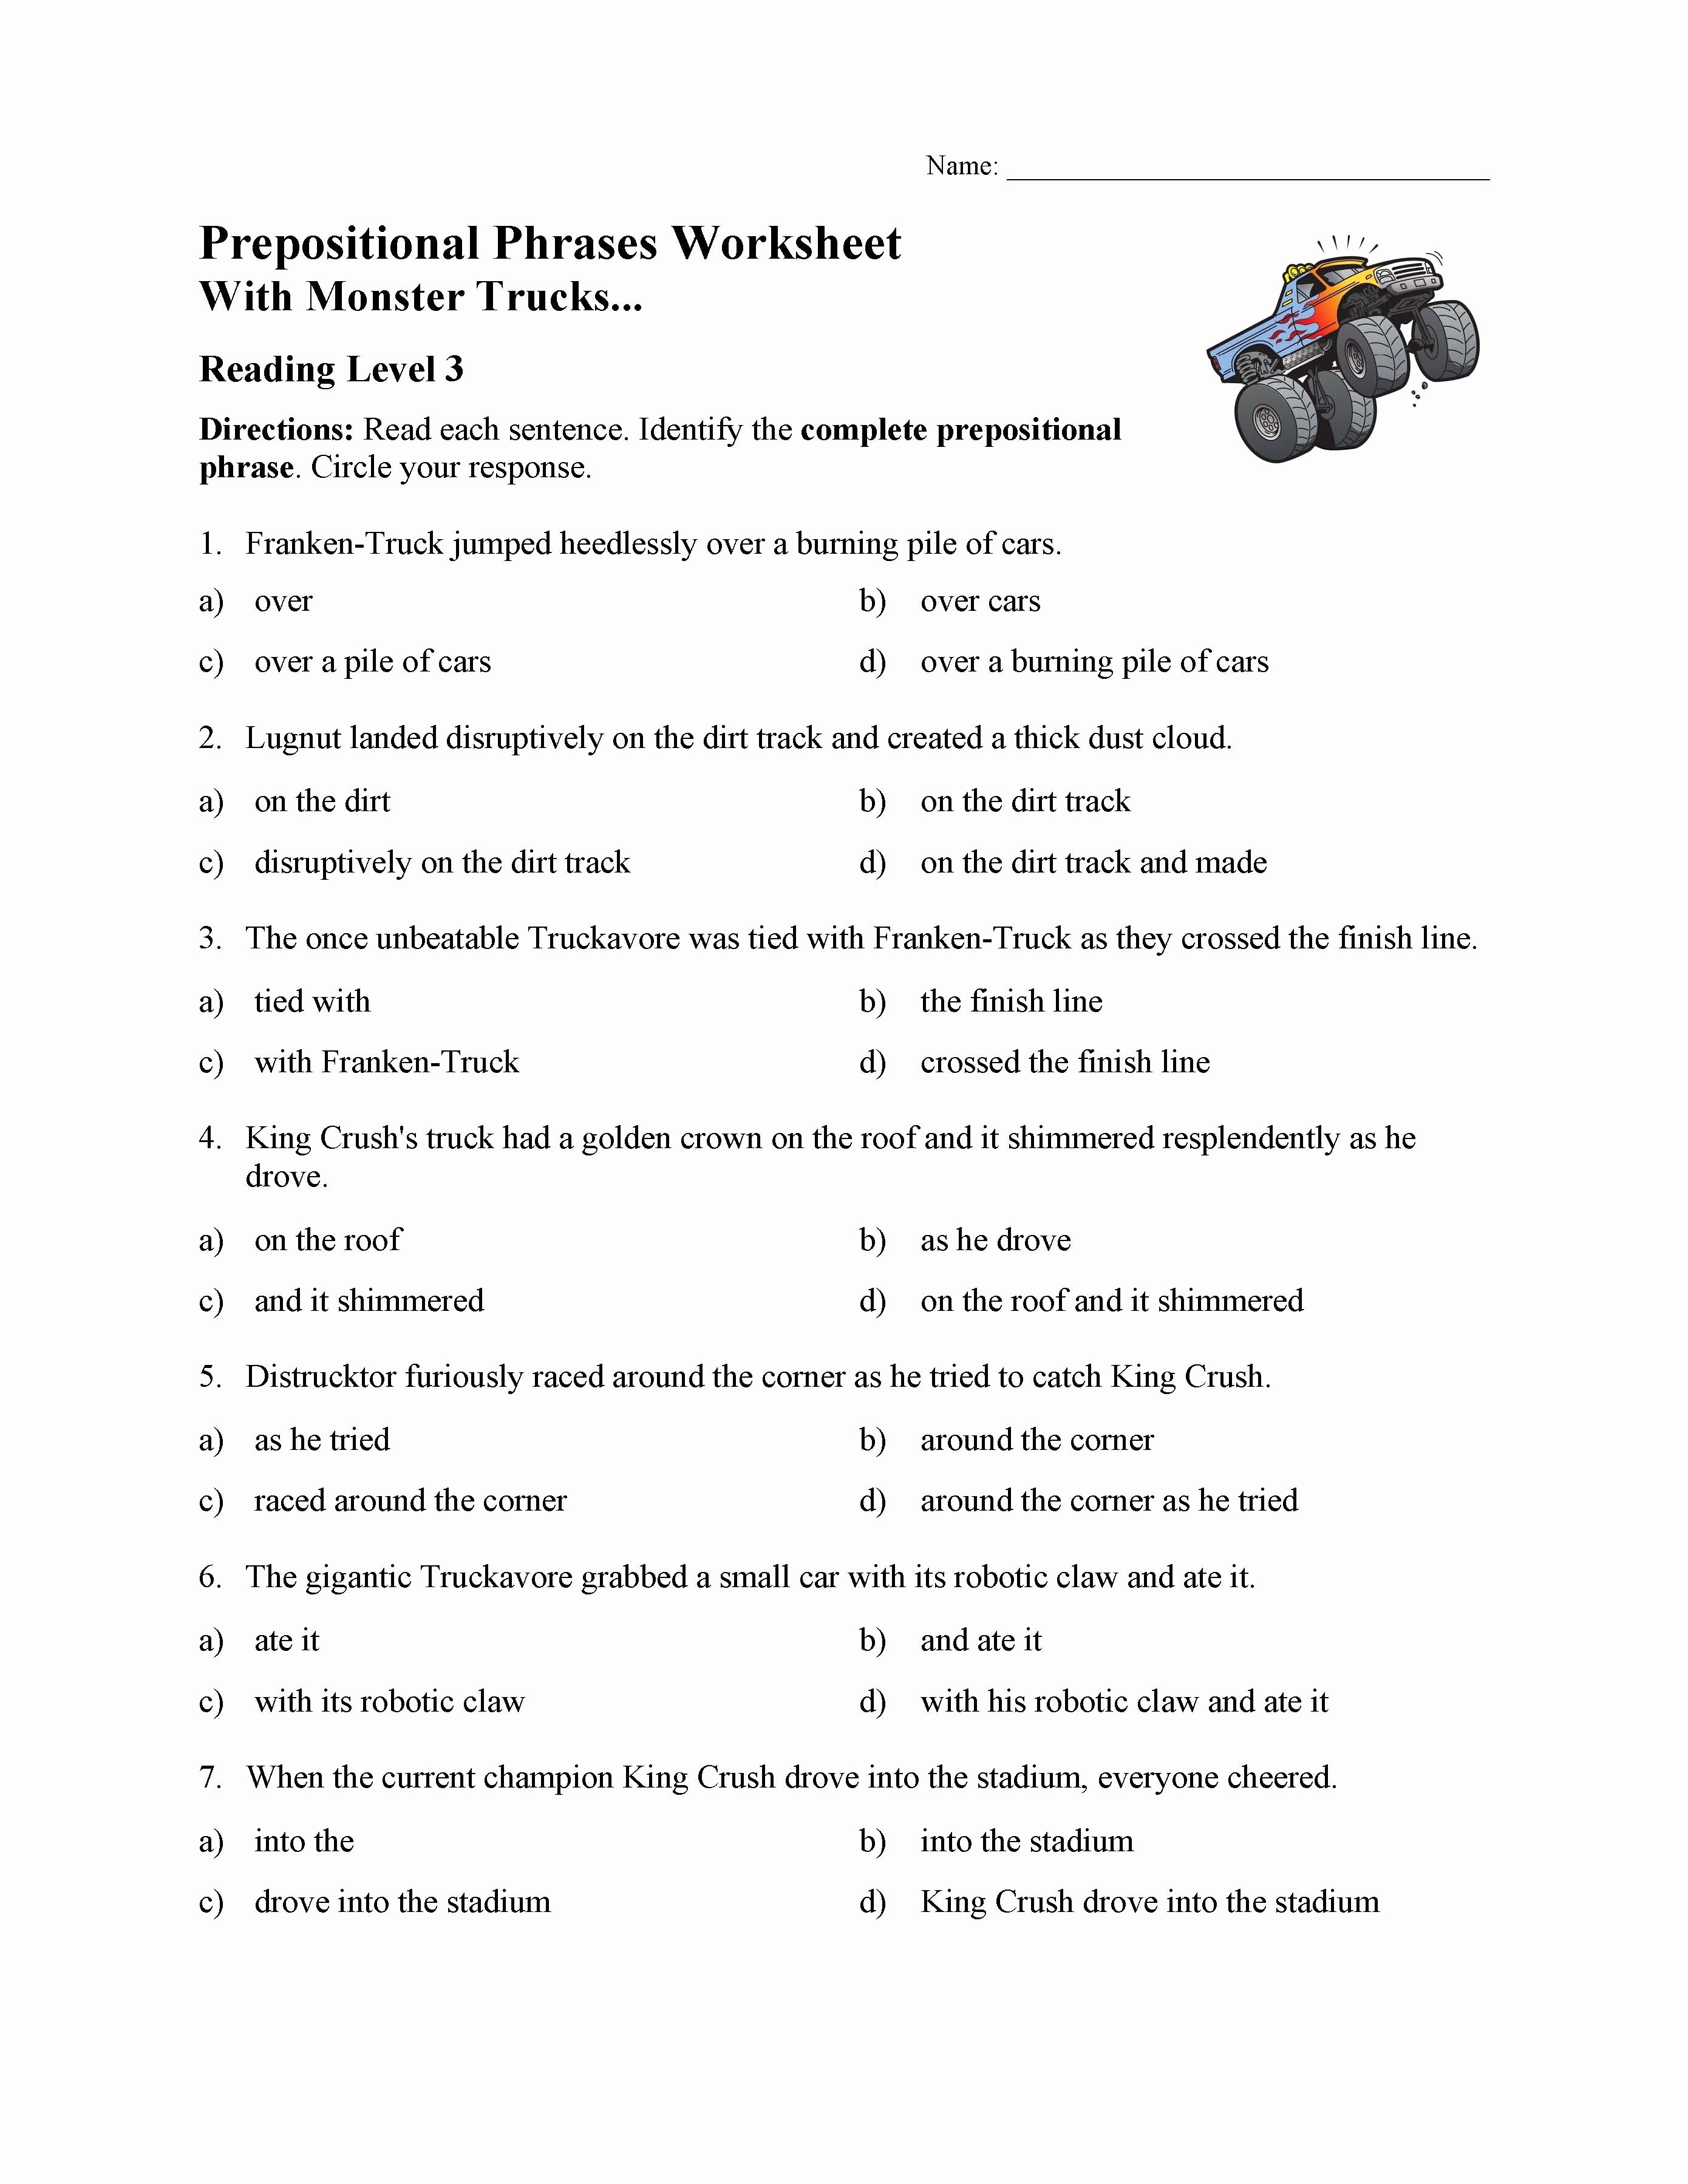 Prepositional Phrase Worksheet with Answers New Prepositional Phrases Worksheet 1 Reading Level 3